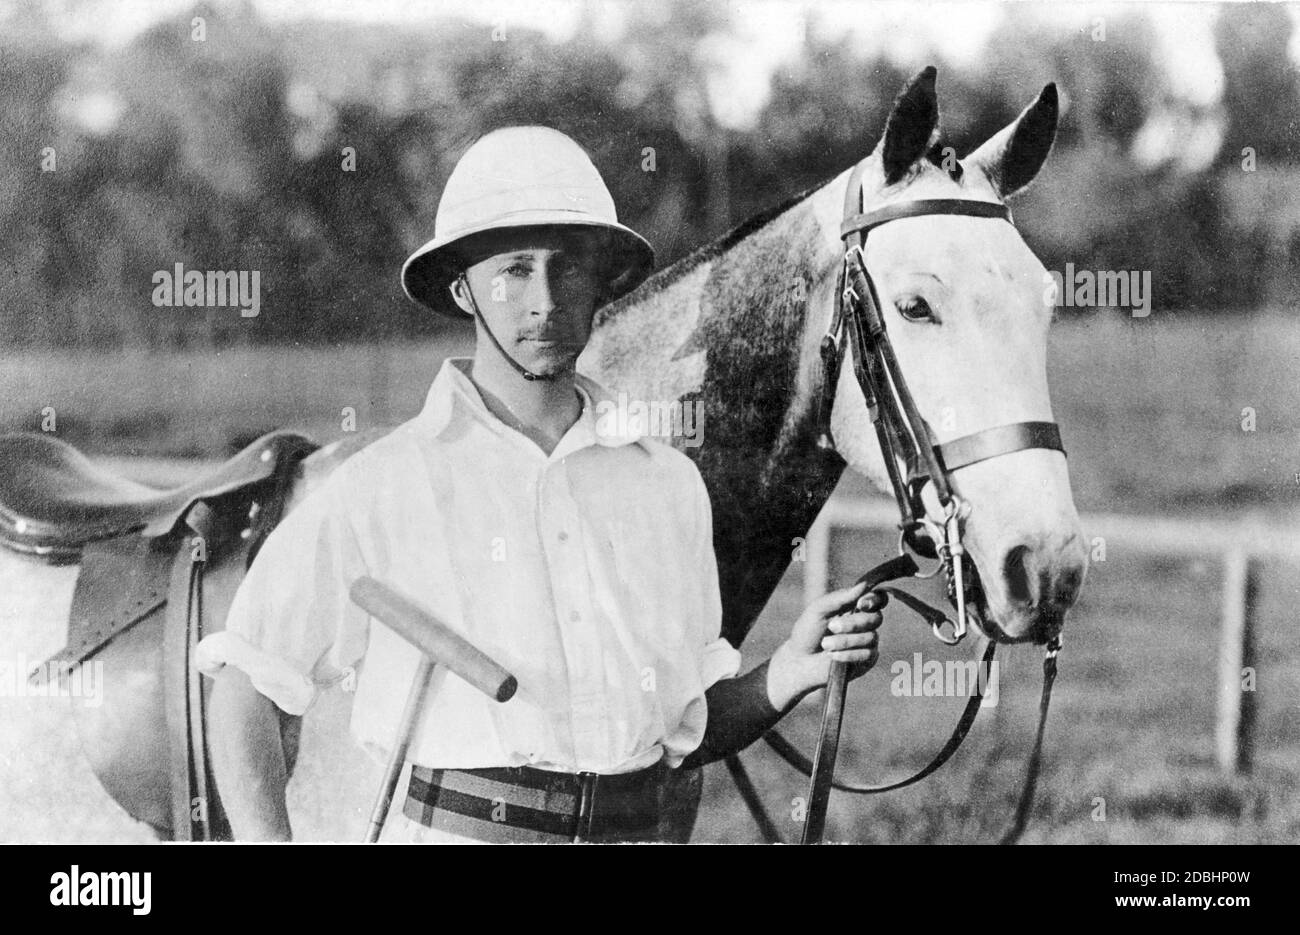 Crown Prince Wilhelm of Prussia (later Kaiser Wilhelm II) as a polo player. Undated photo, made around 1880. Stock Photo